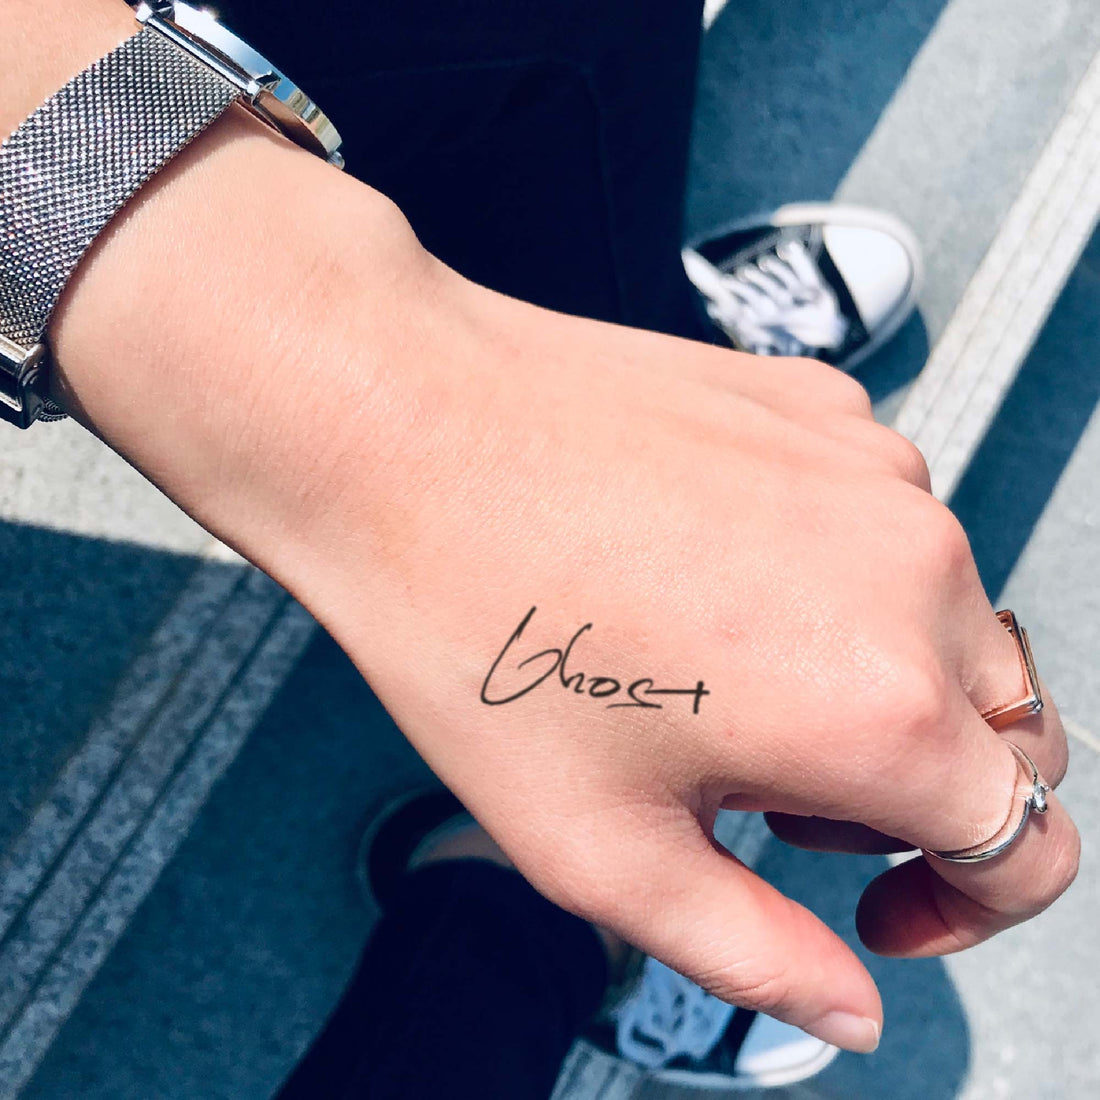 Ghost custom temporary tattoo sticker design idea inspiration meanings removal arm wrist hand words font name signature calligraphy lyrics tour concert outfits merch accessory gift souvenir costumes wear dress up code